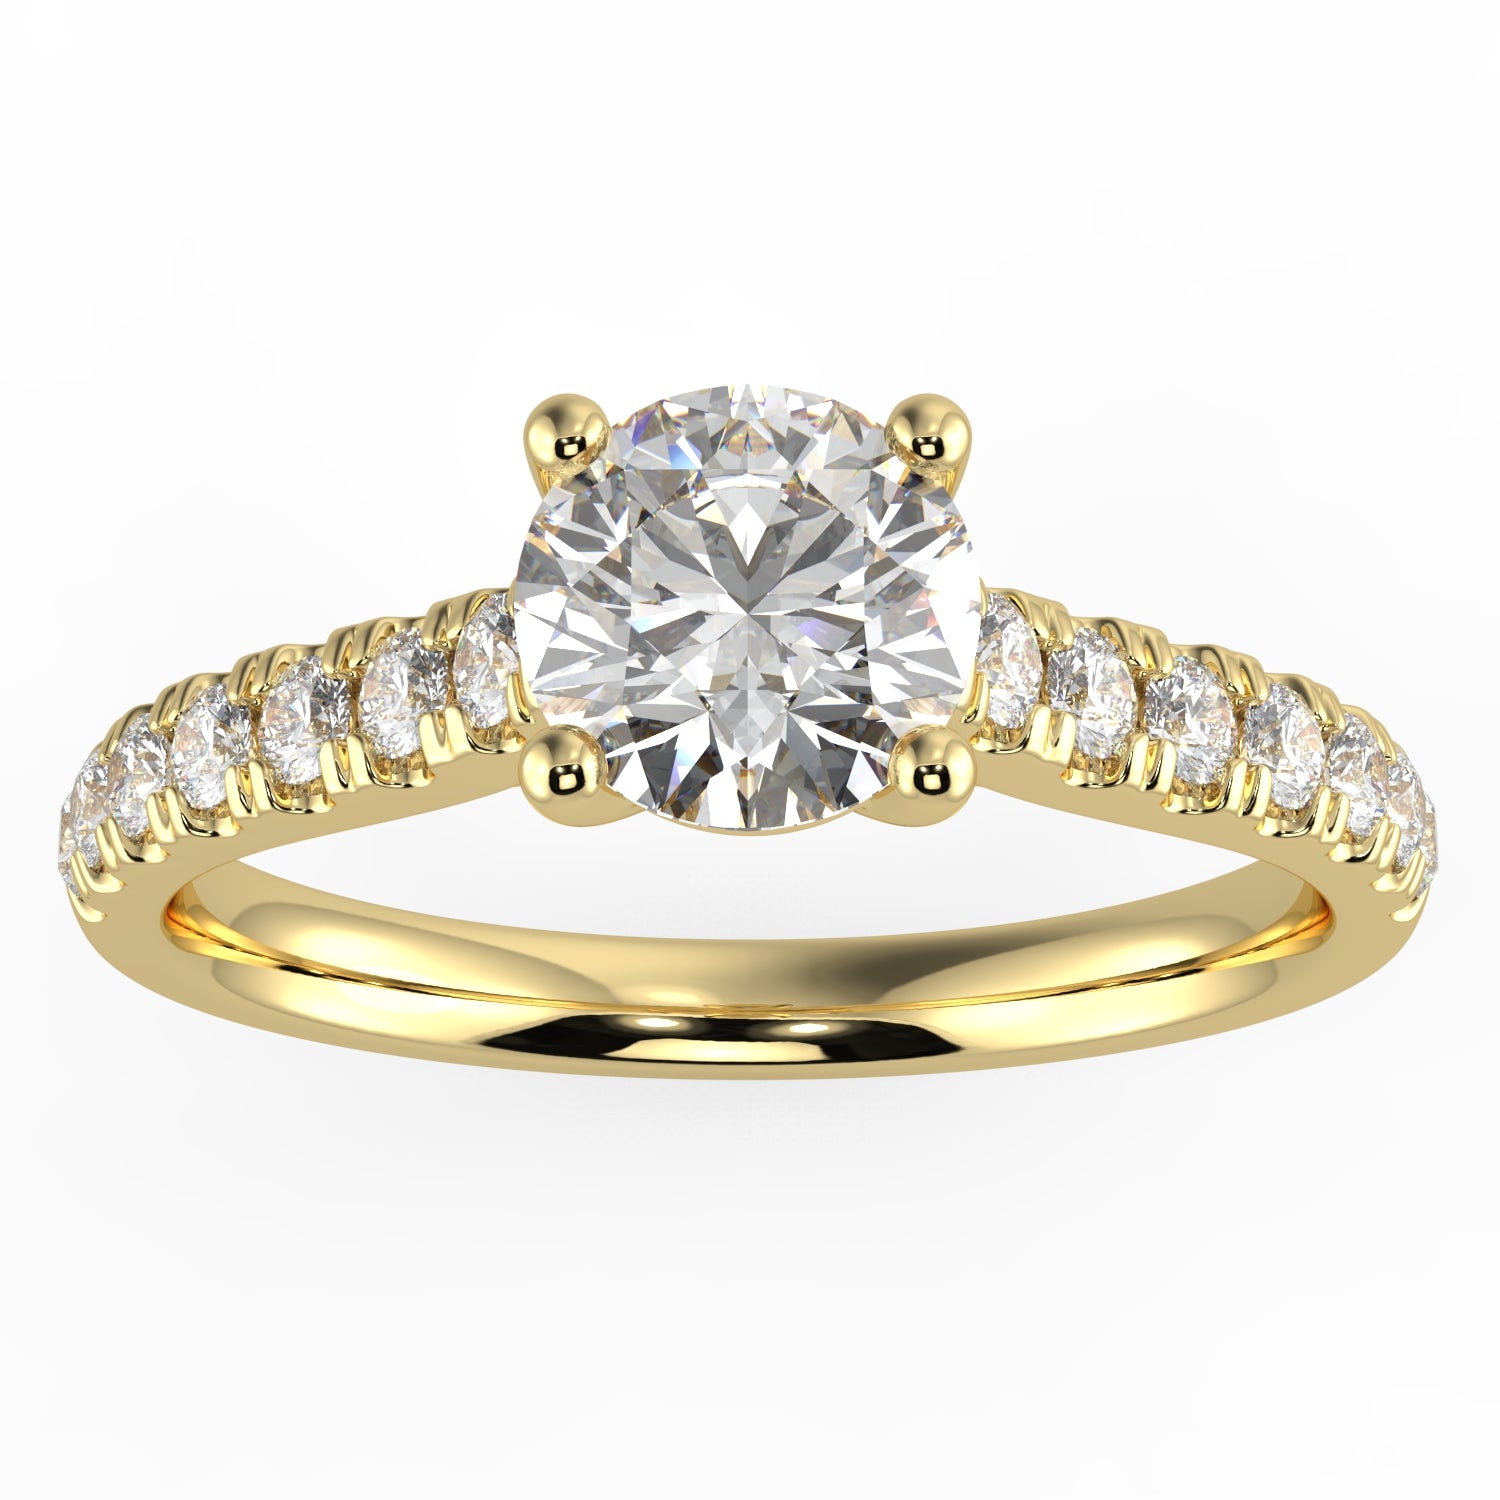 Natural Diamond Slim Shank Ring with 0.70ctw Round Shape Center & 0.30 Round Side GHI1 Stones Set on 14K Gold